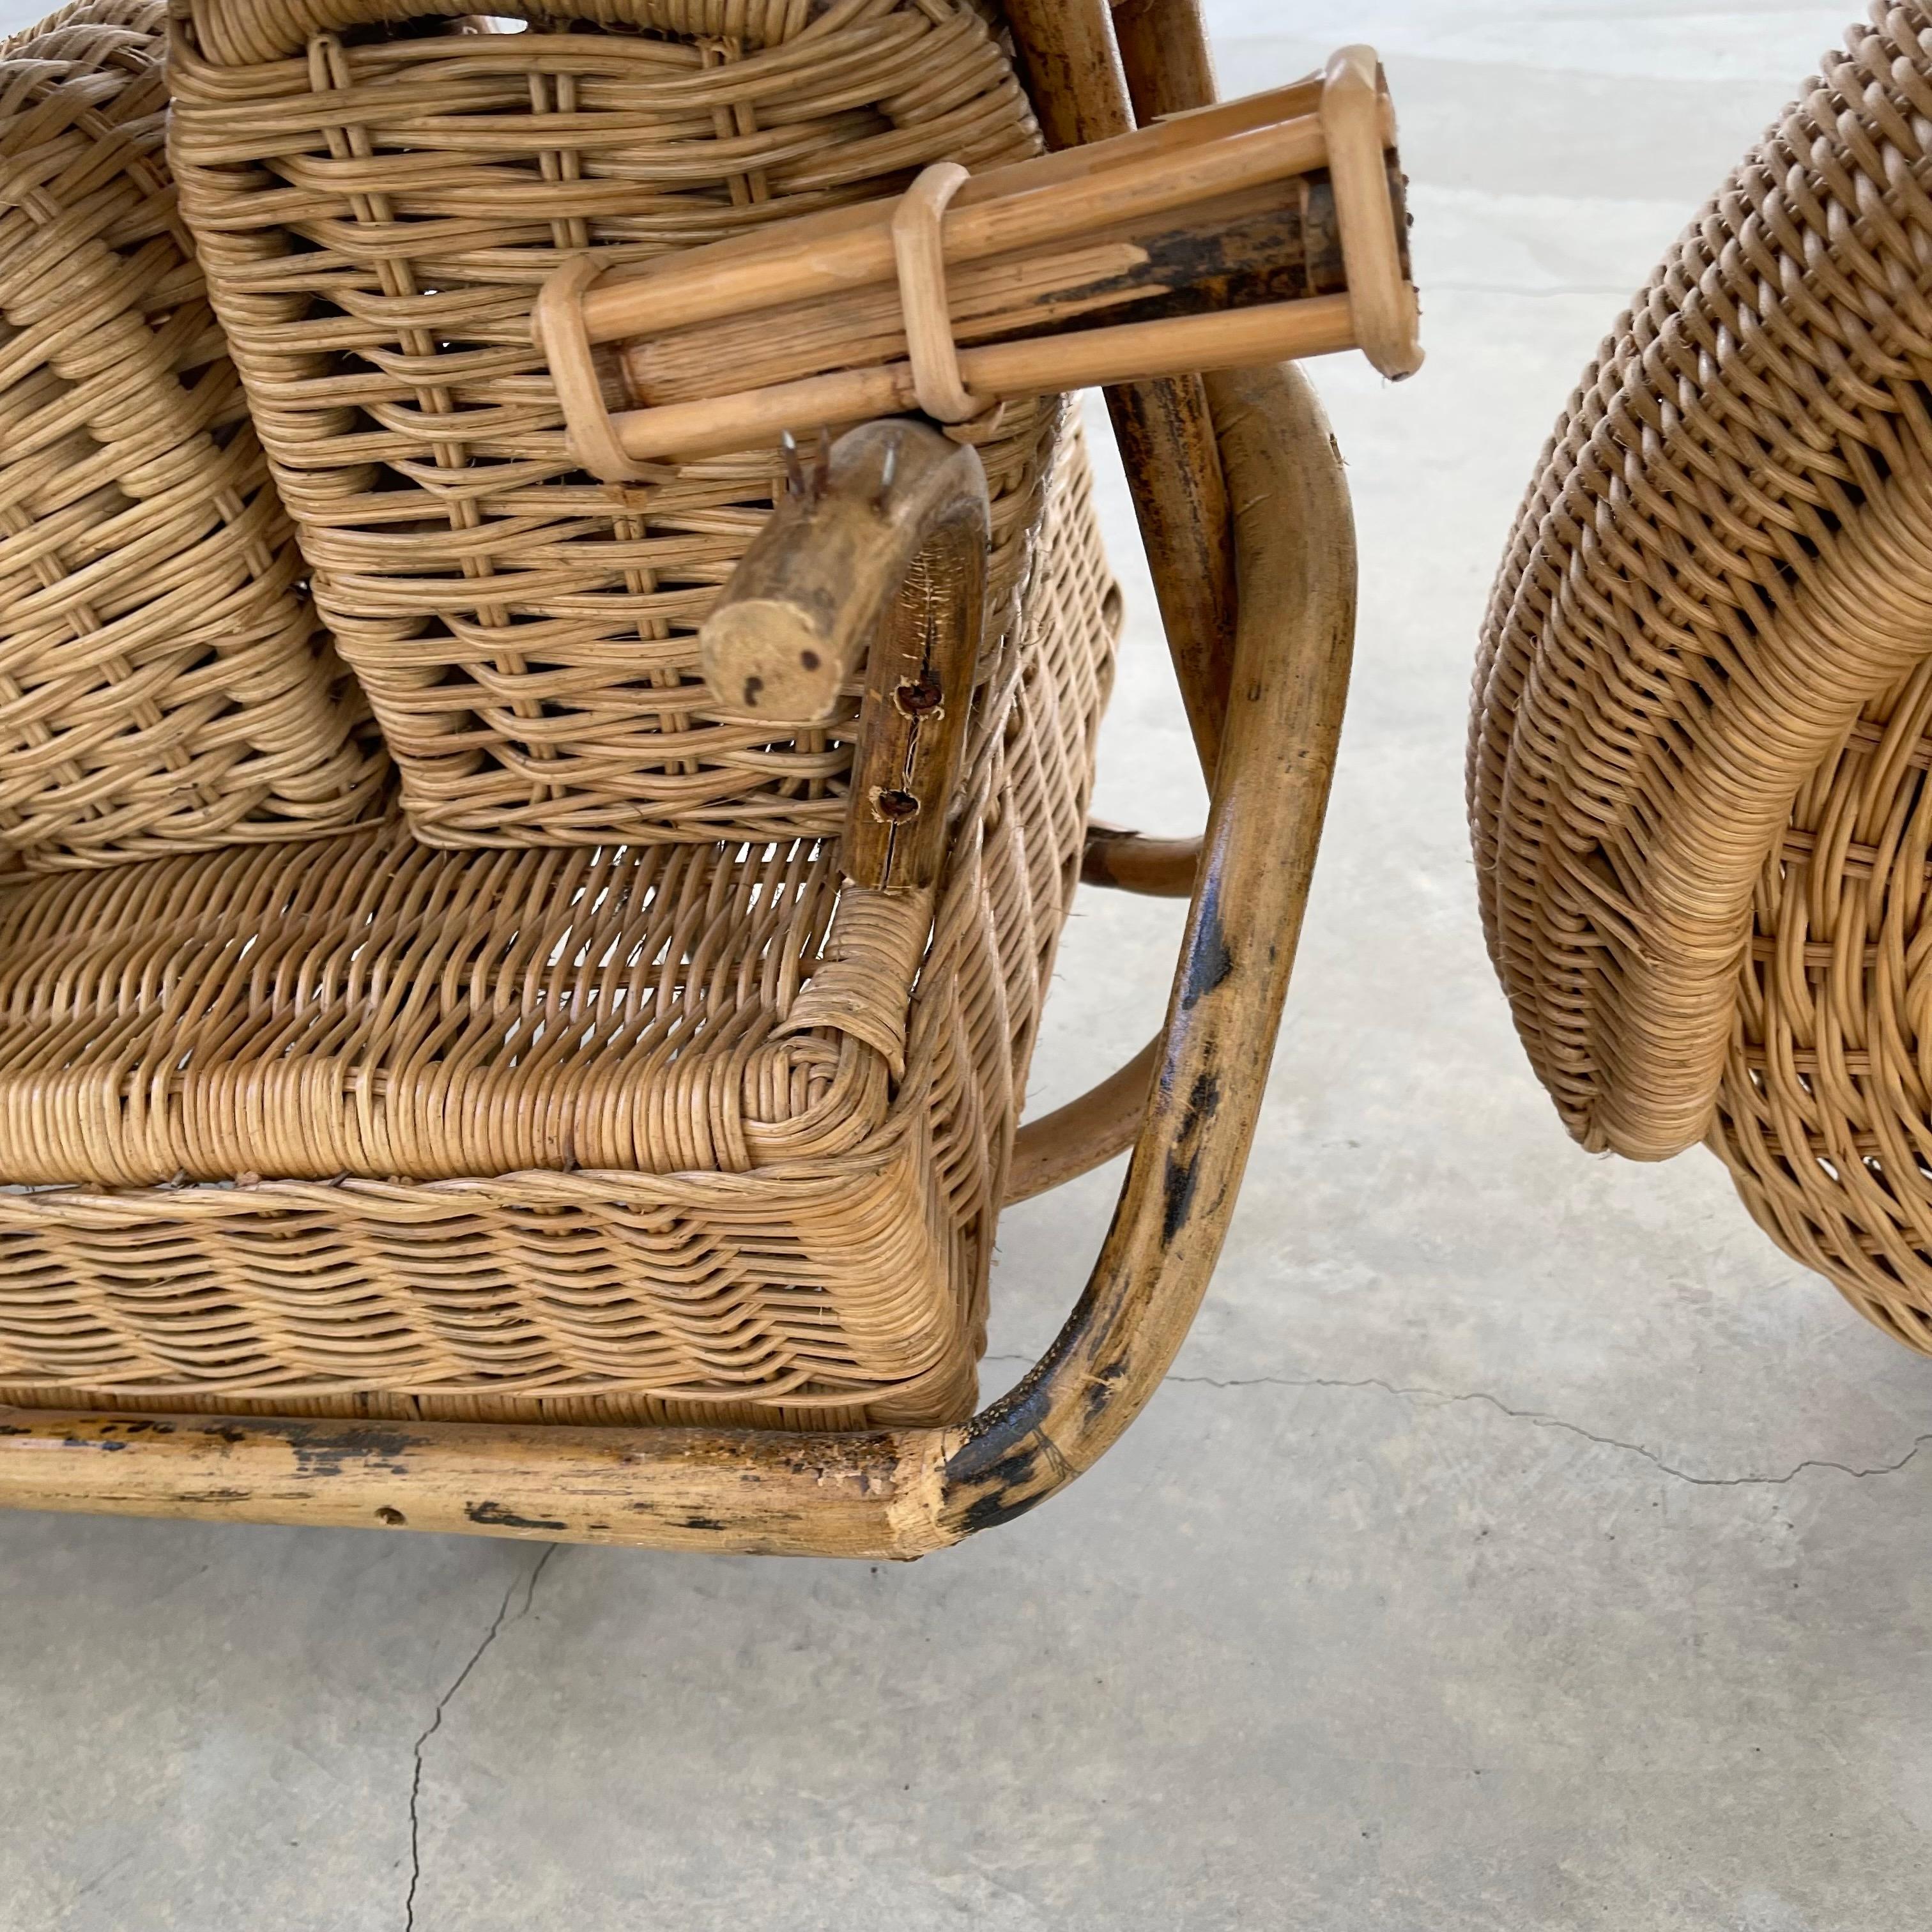 Massive Rattan, Bamboo and Wicker Harley Davidson Motorcycle For Sale 4